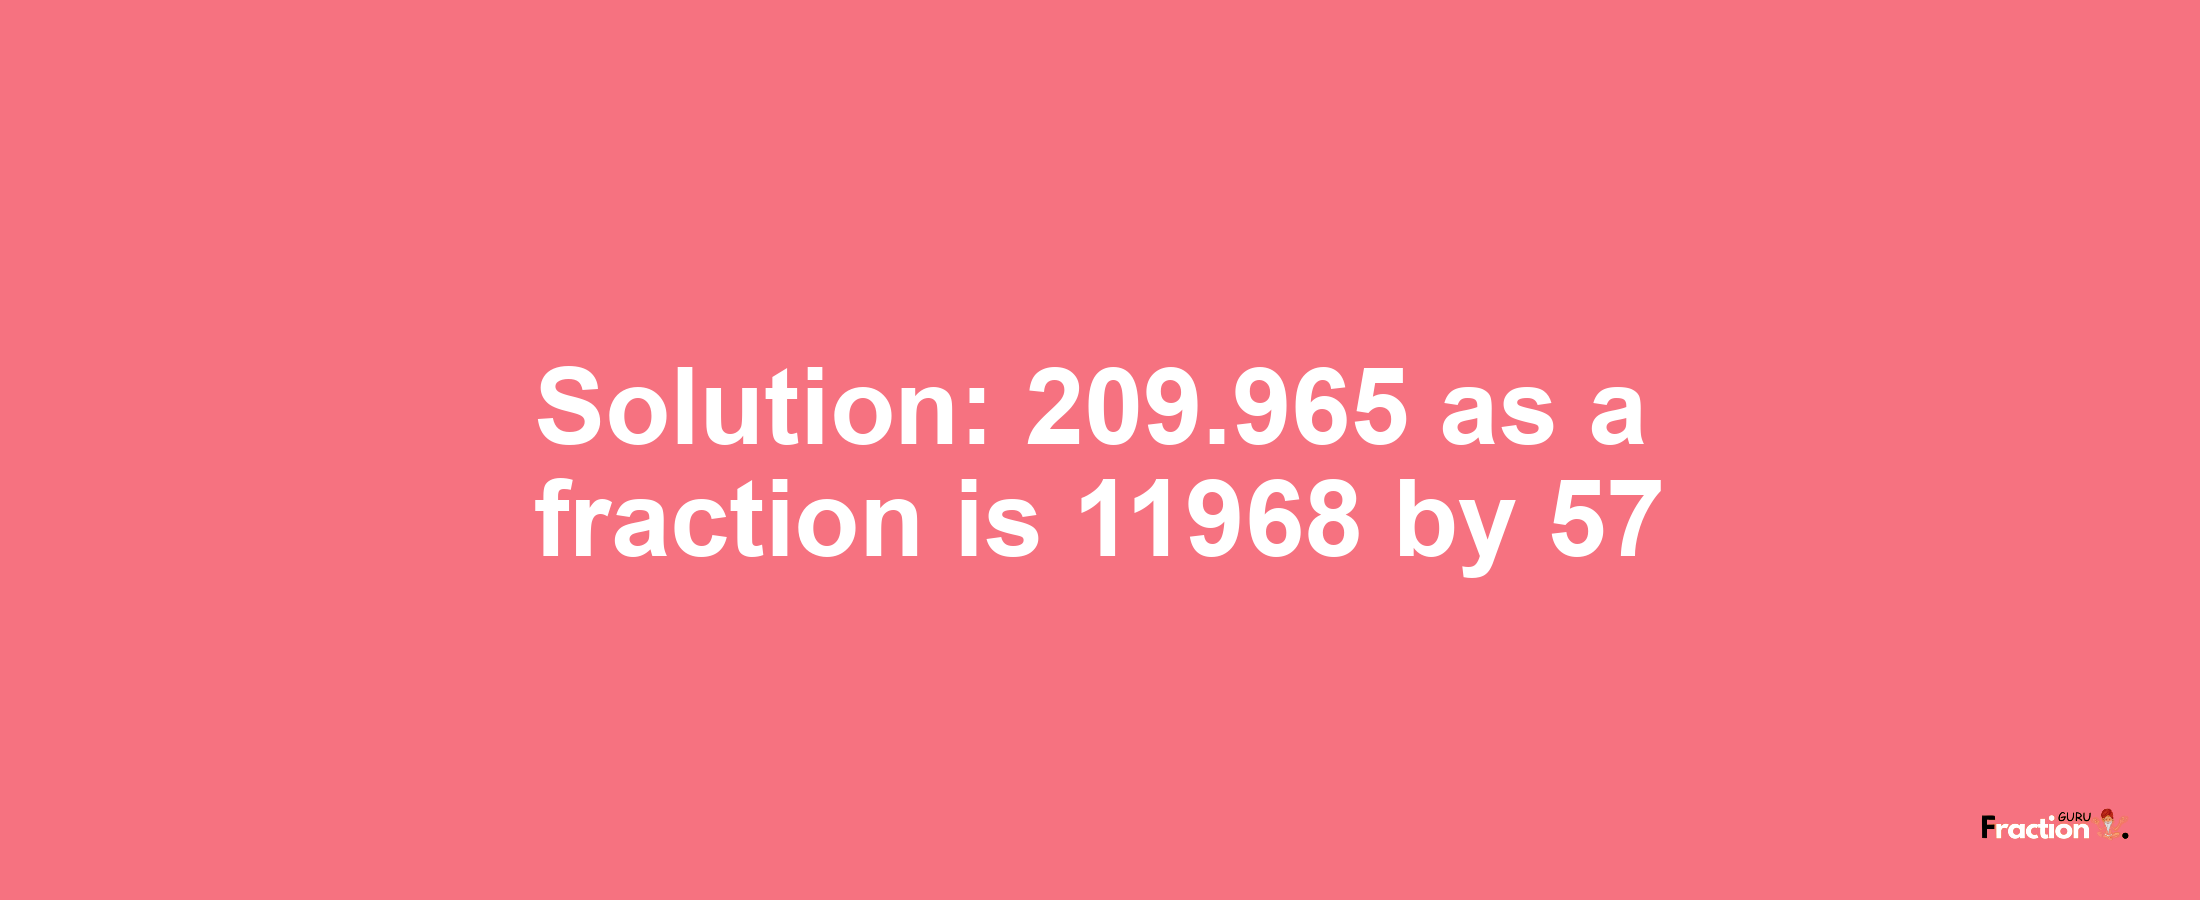 Solution:209.965 as a fraction is 11968/57